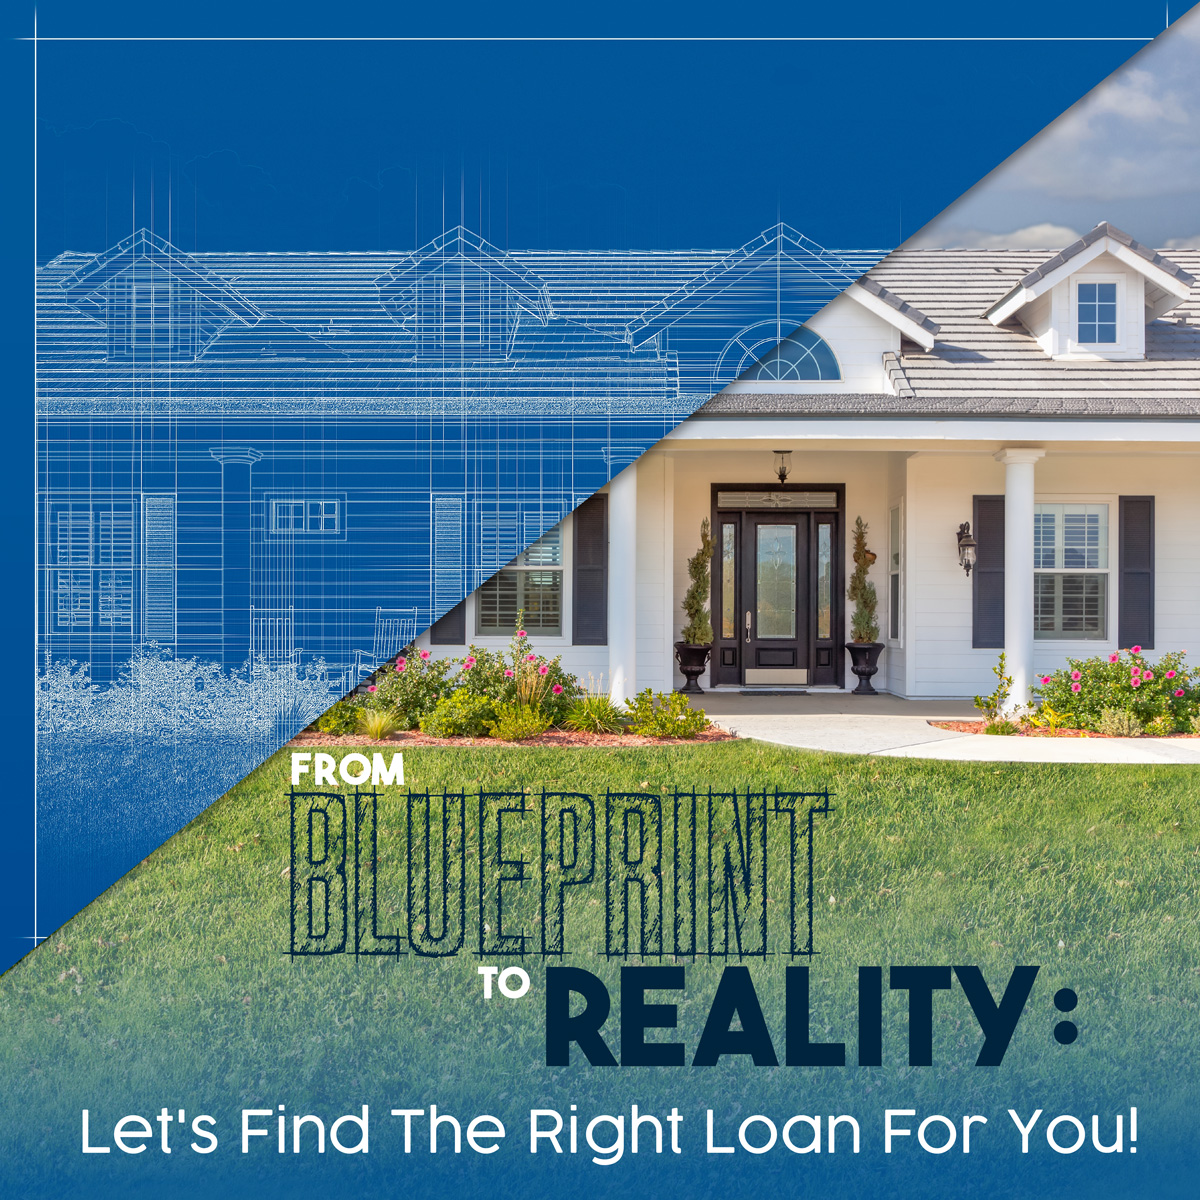 Are you looking for a new construction home? Don't limit yourself to your builder's preferred lender. I'm here to help! Contact me today to make the most of your homebuying experience!
#KatLendsTX #aequalend #HomebuyingMadeEasy #builder #newbuild #contactme #preferredlender